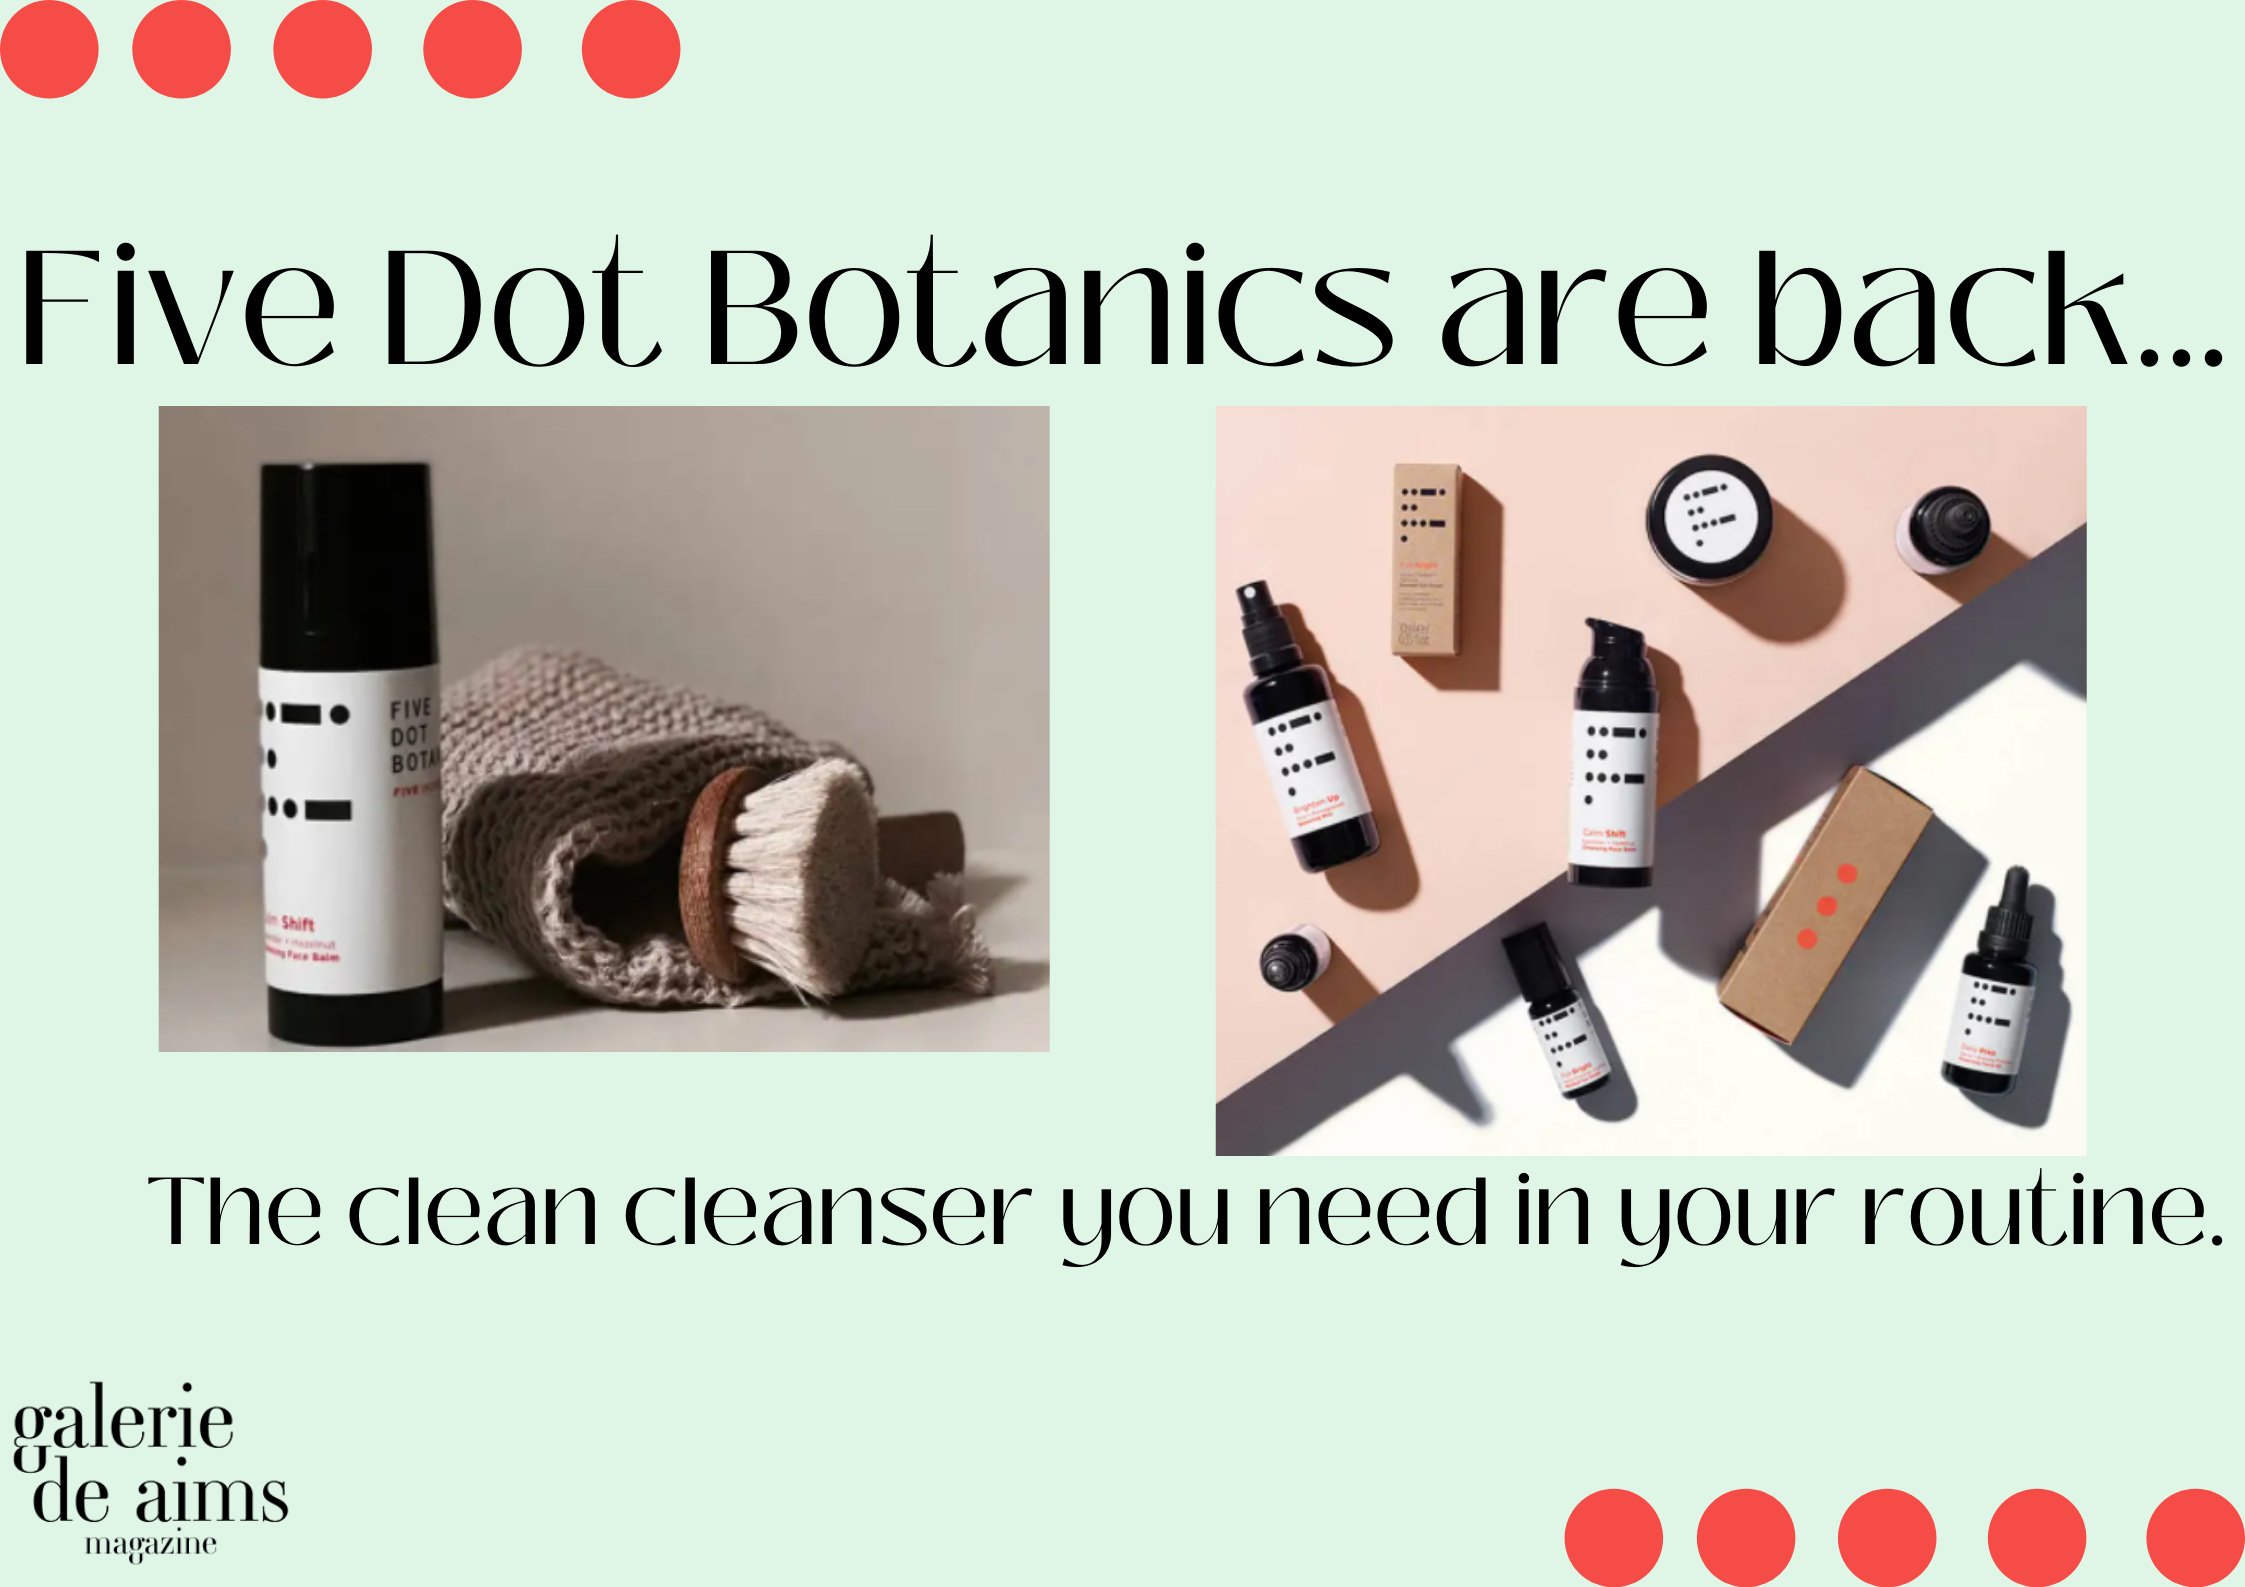 Five Dot Botanics: The clean cleanser you need in your routine.